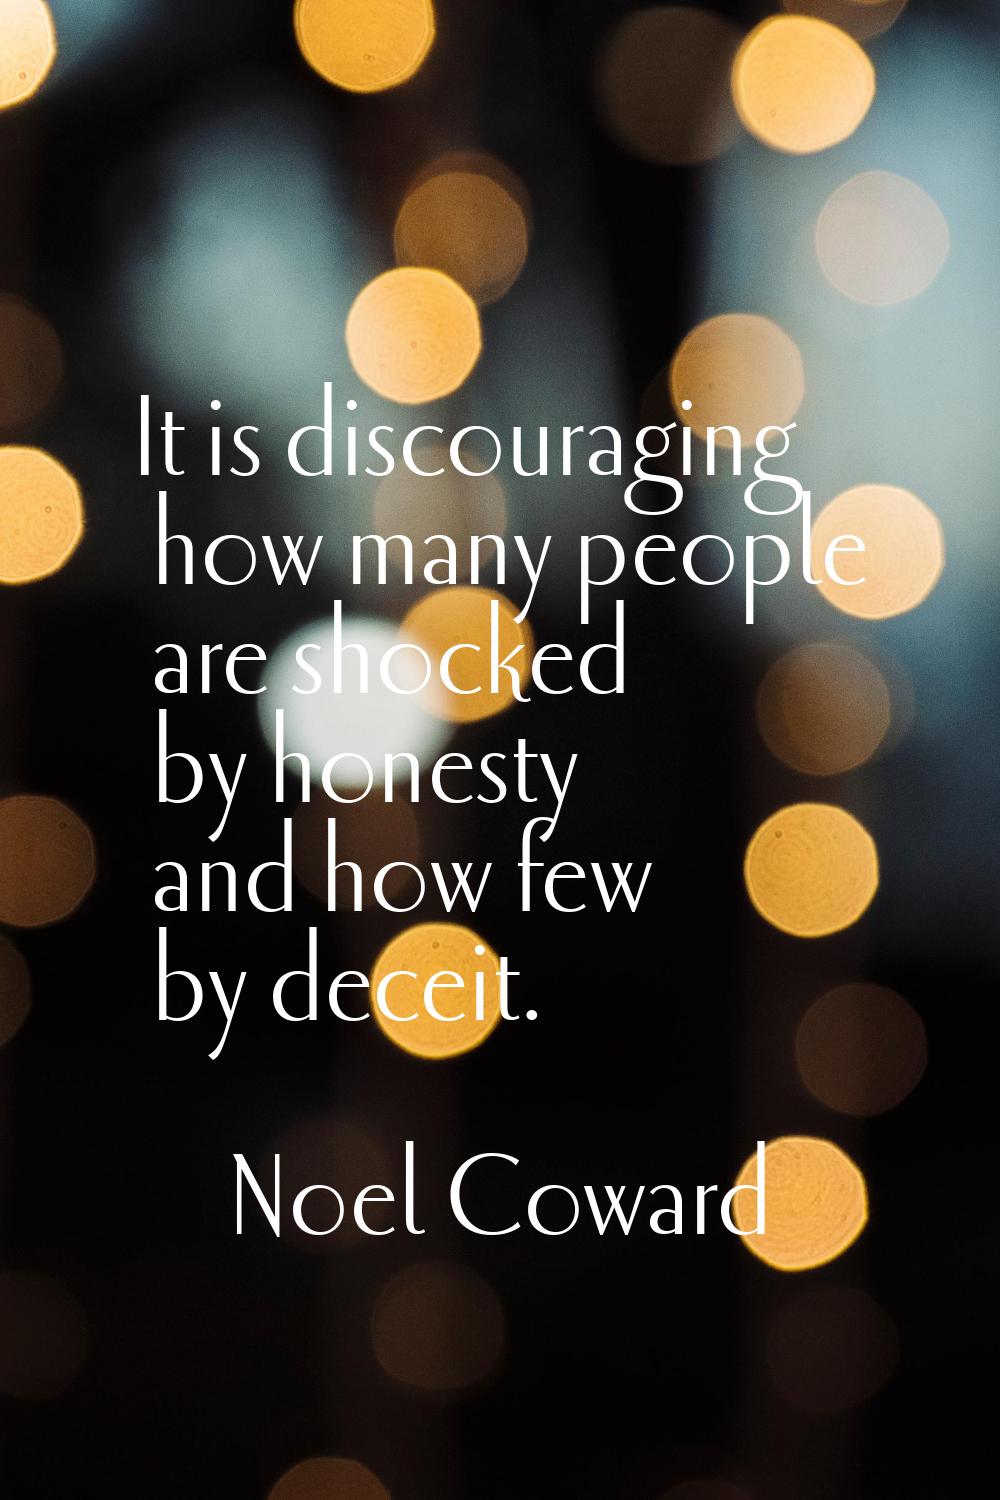 It is discouraging how many people are shocked by honesty and how few by deceit.